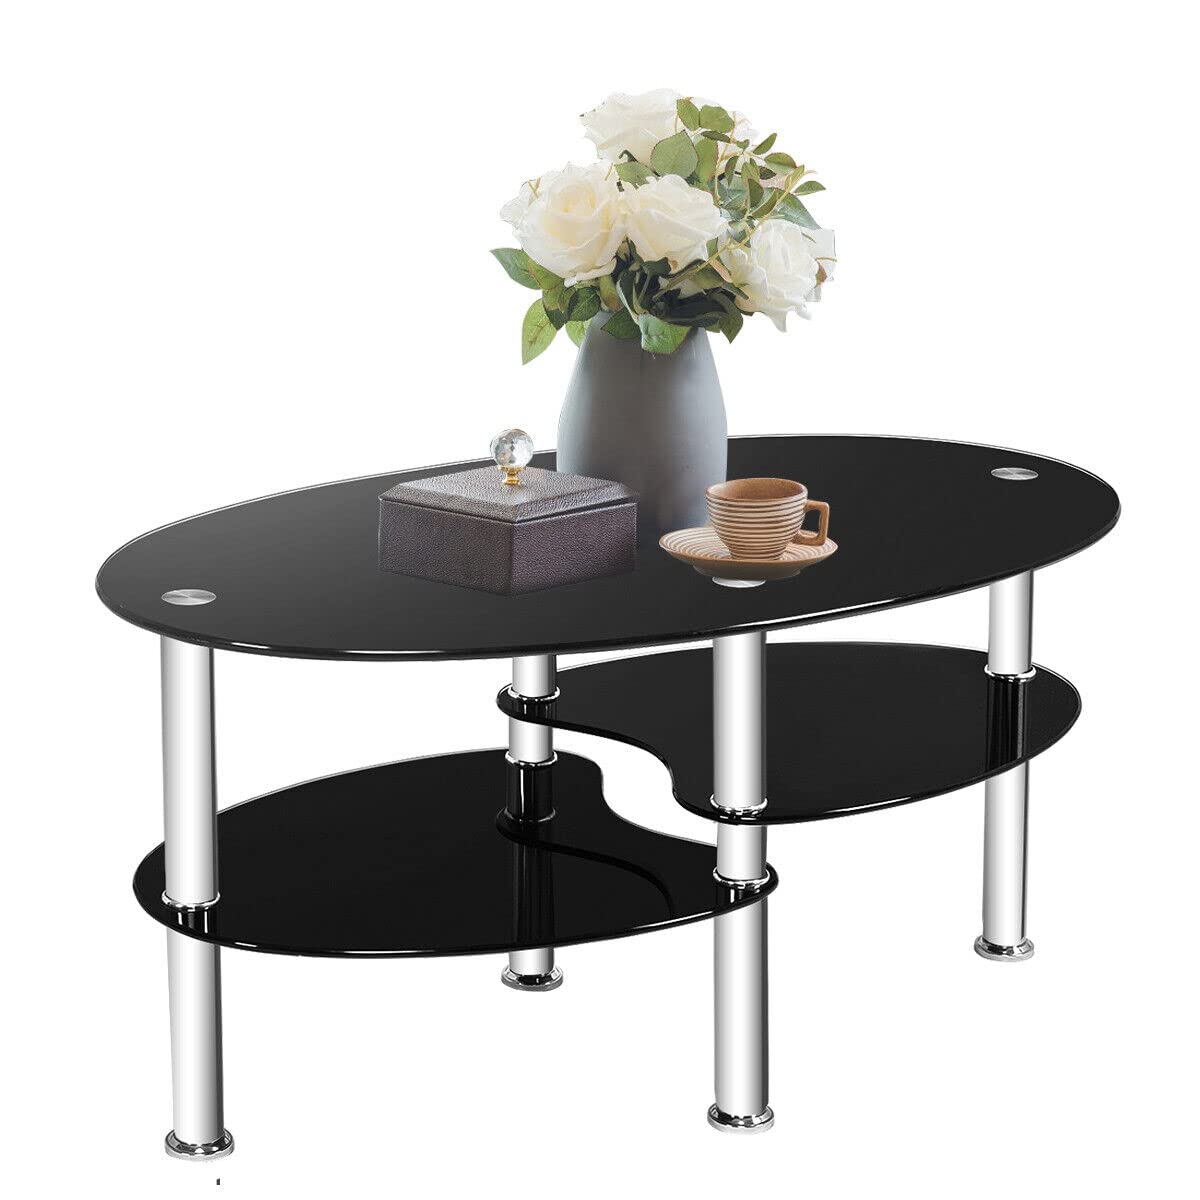 Giantex Tempered Glass Coffee Table, 3-Tire Modern Oval Tea Table, Smooth End Table with Open Storage Shelf